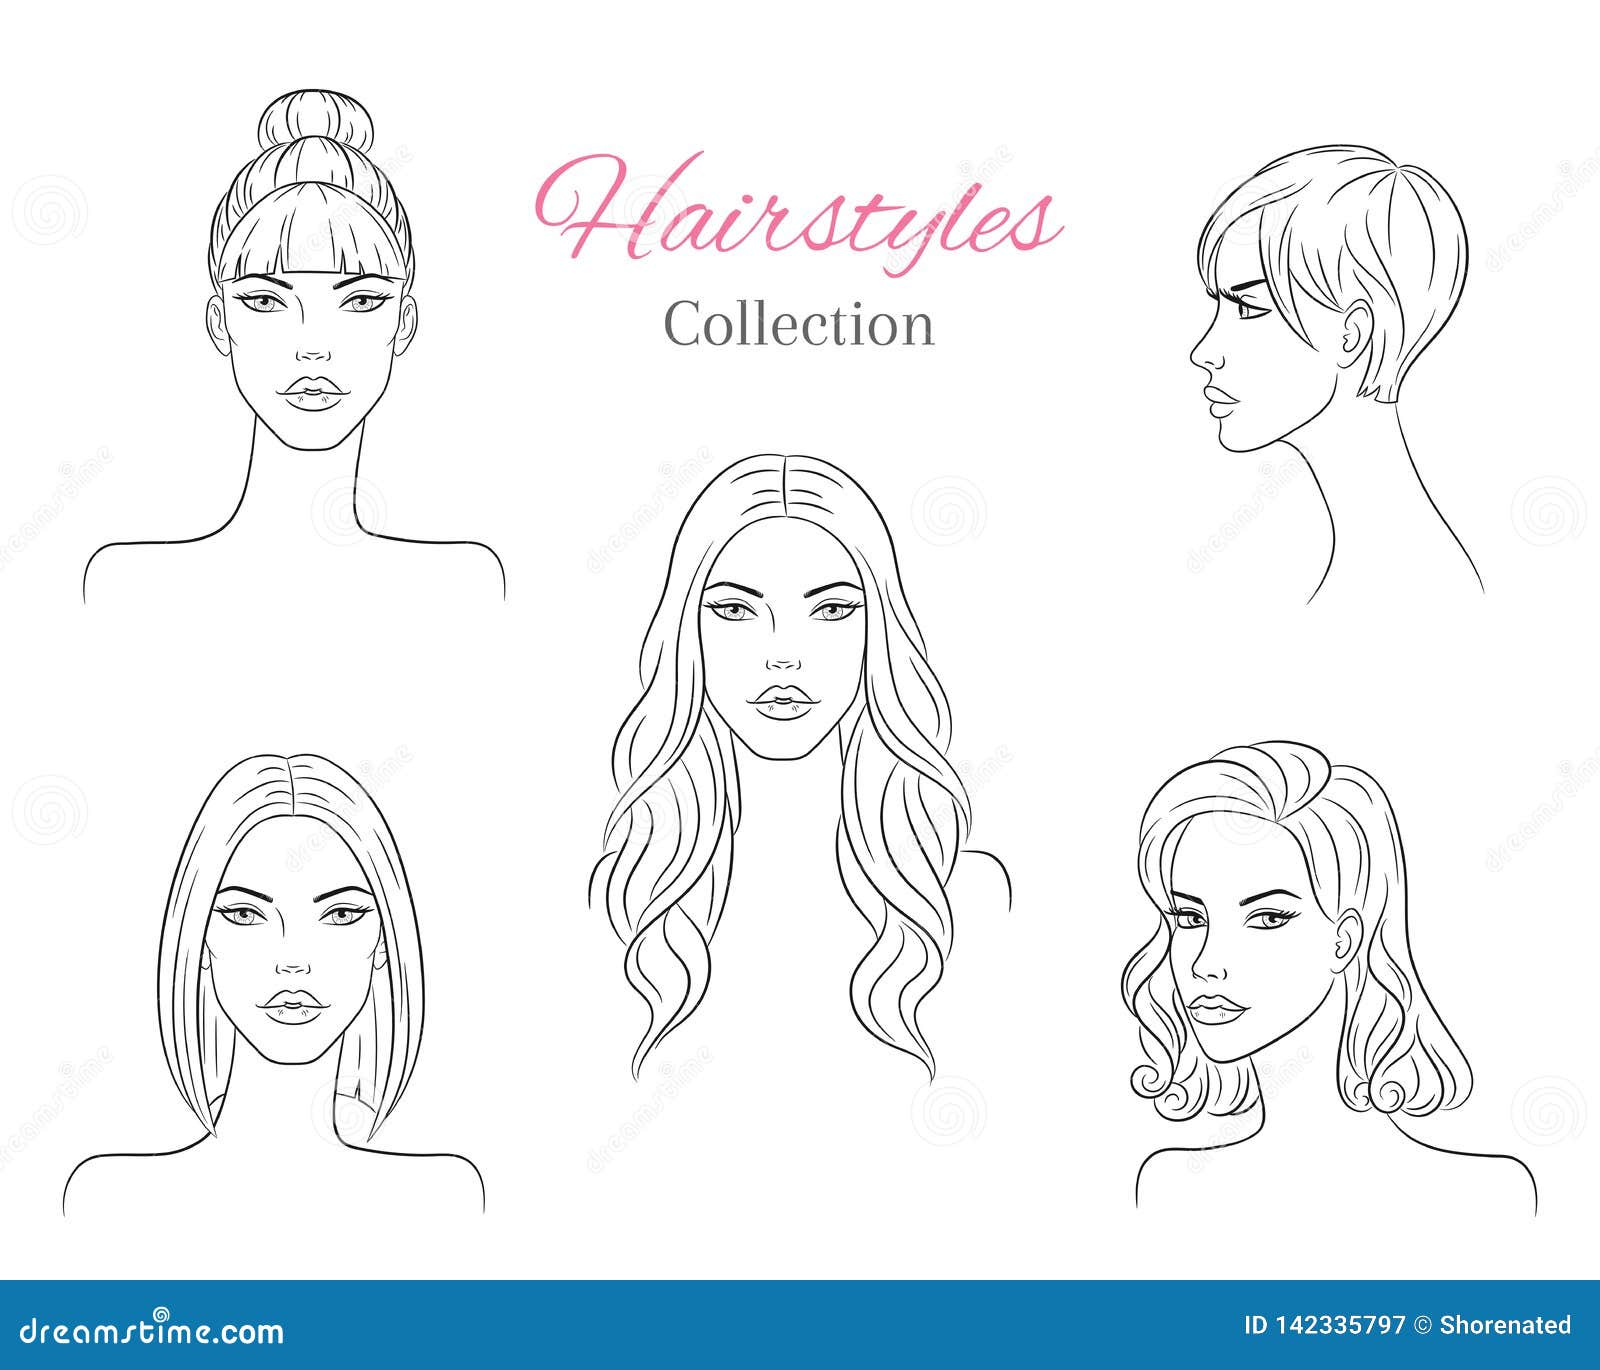 Hair Fashion Girl: Over 542,800 Royalty-Free Licensable Stock Illustrations  & Drawings | Shutterstock